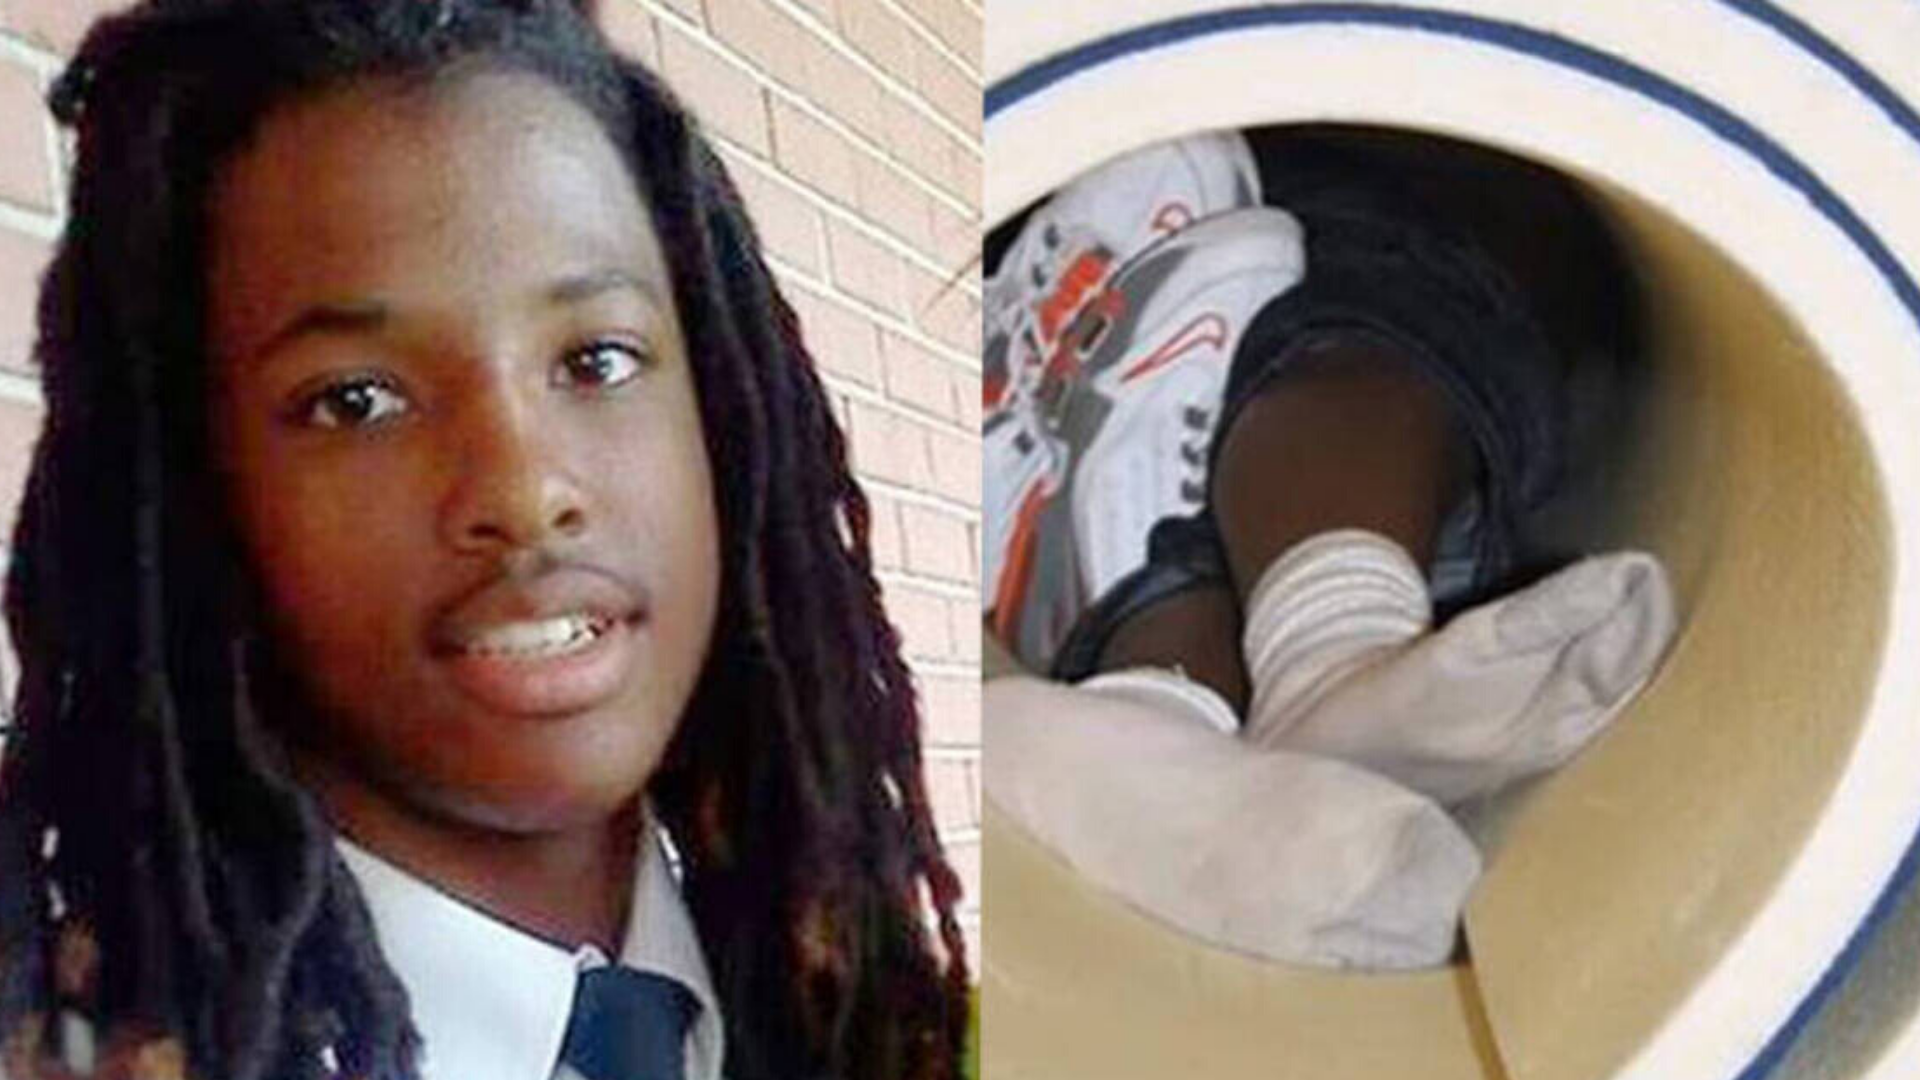 Floyd unrest prompts petition to look into Kendrick Johnson's death